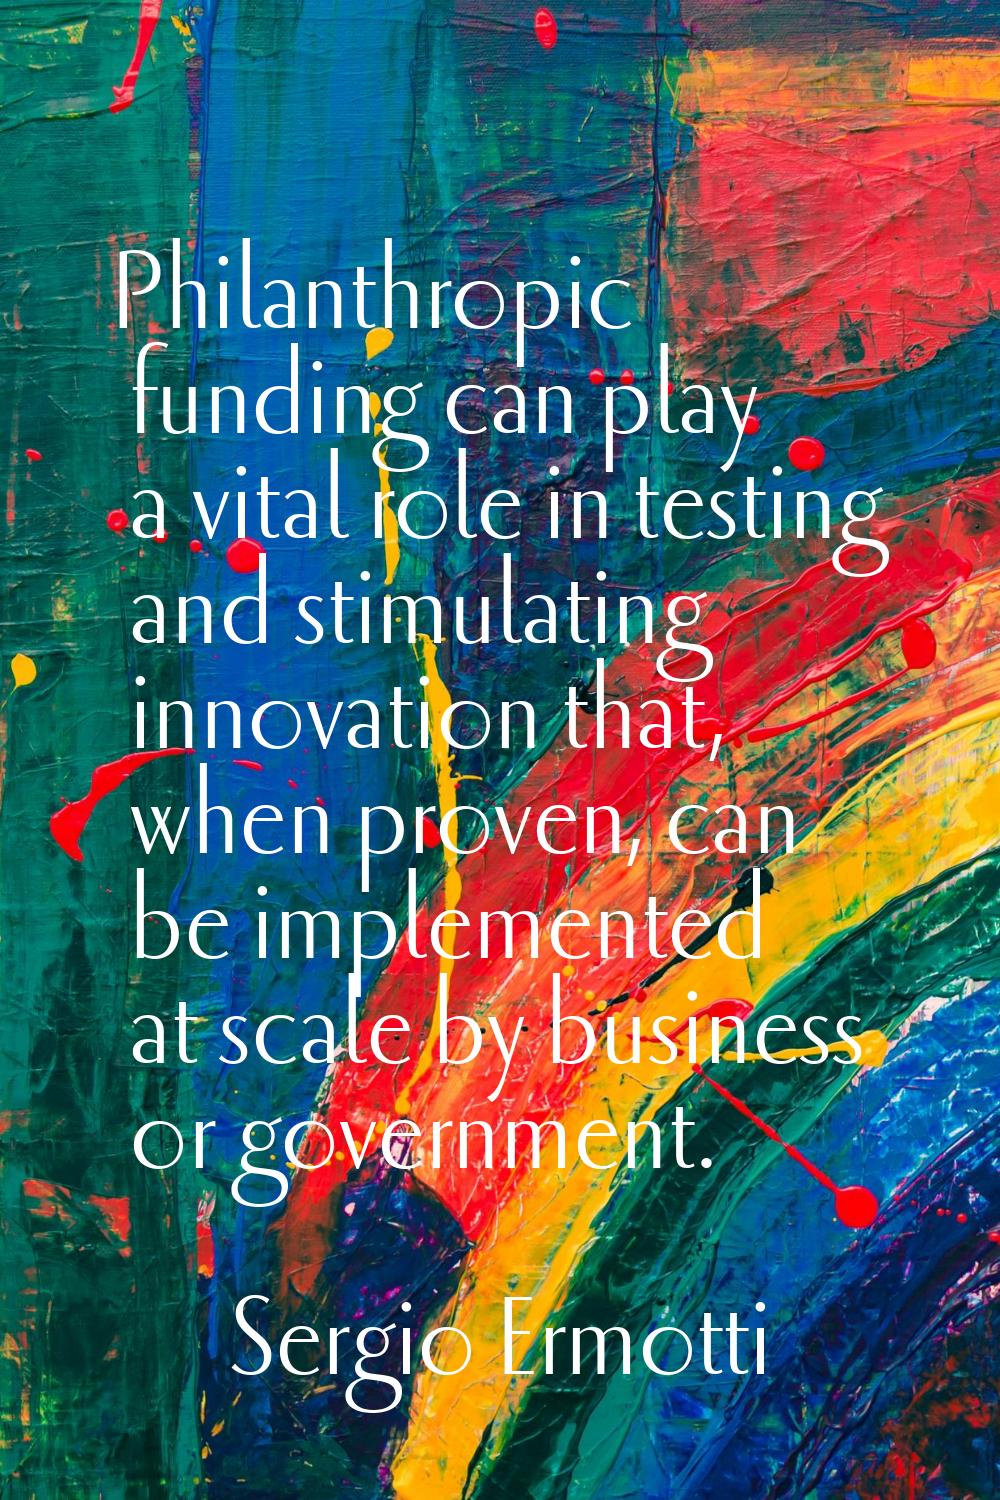 Philanthropic funding can play a vital role in testing and stimulating innovation that, when proven